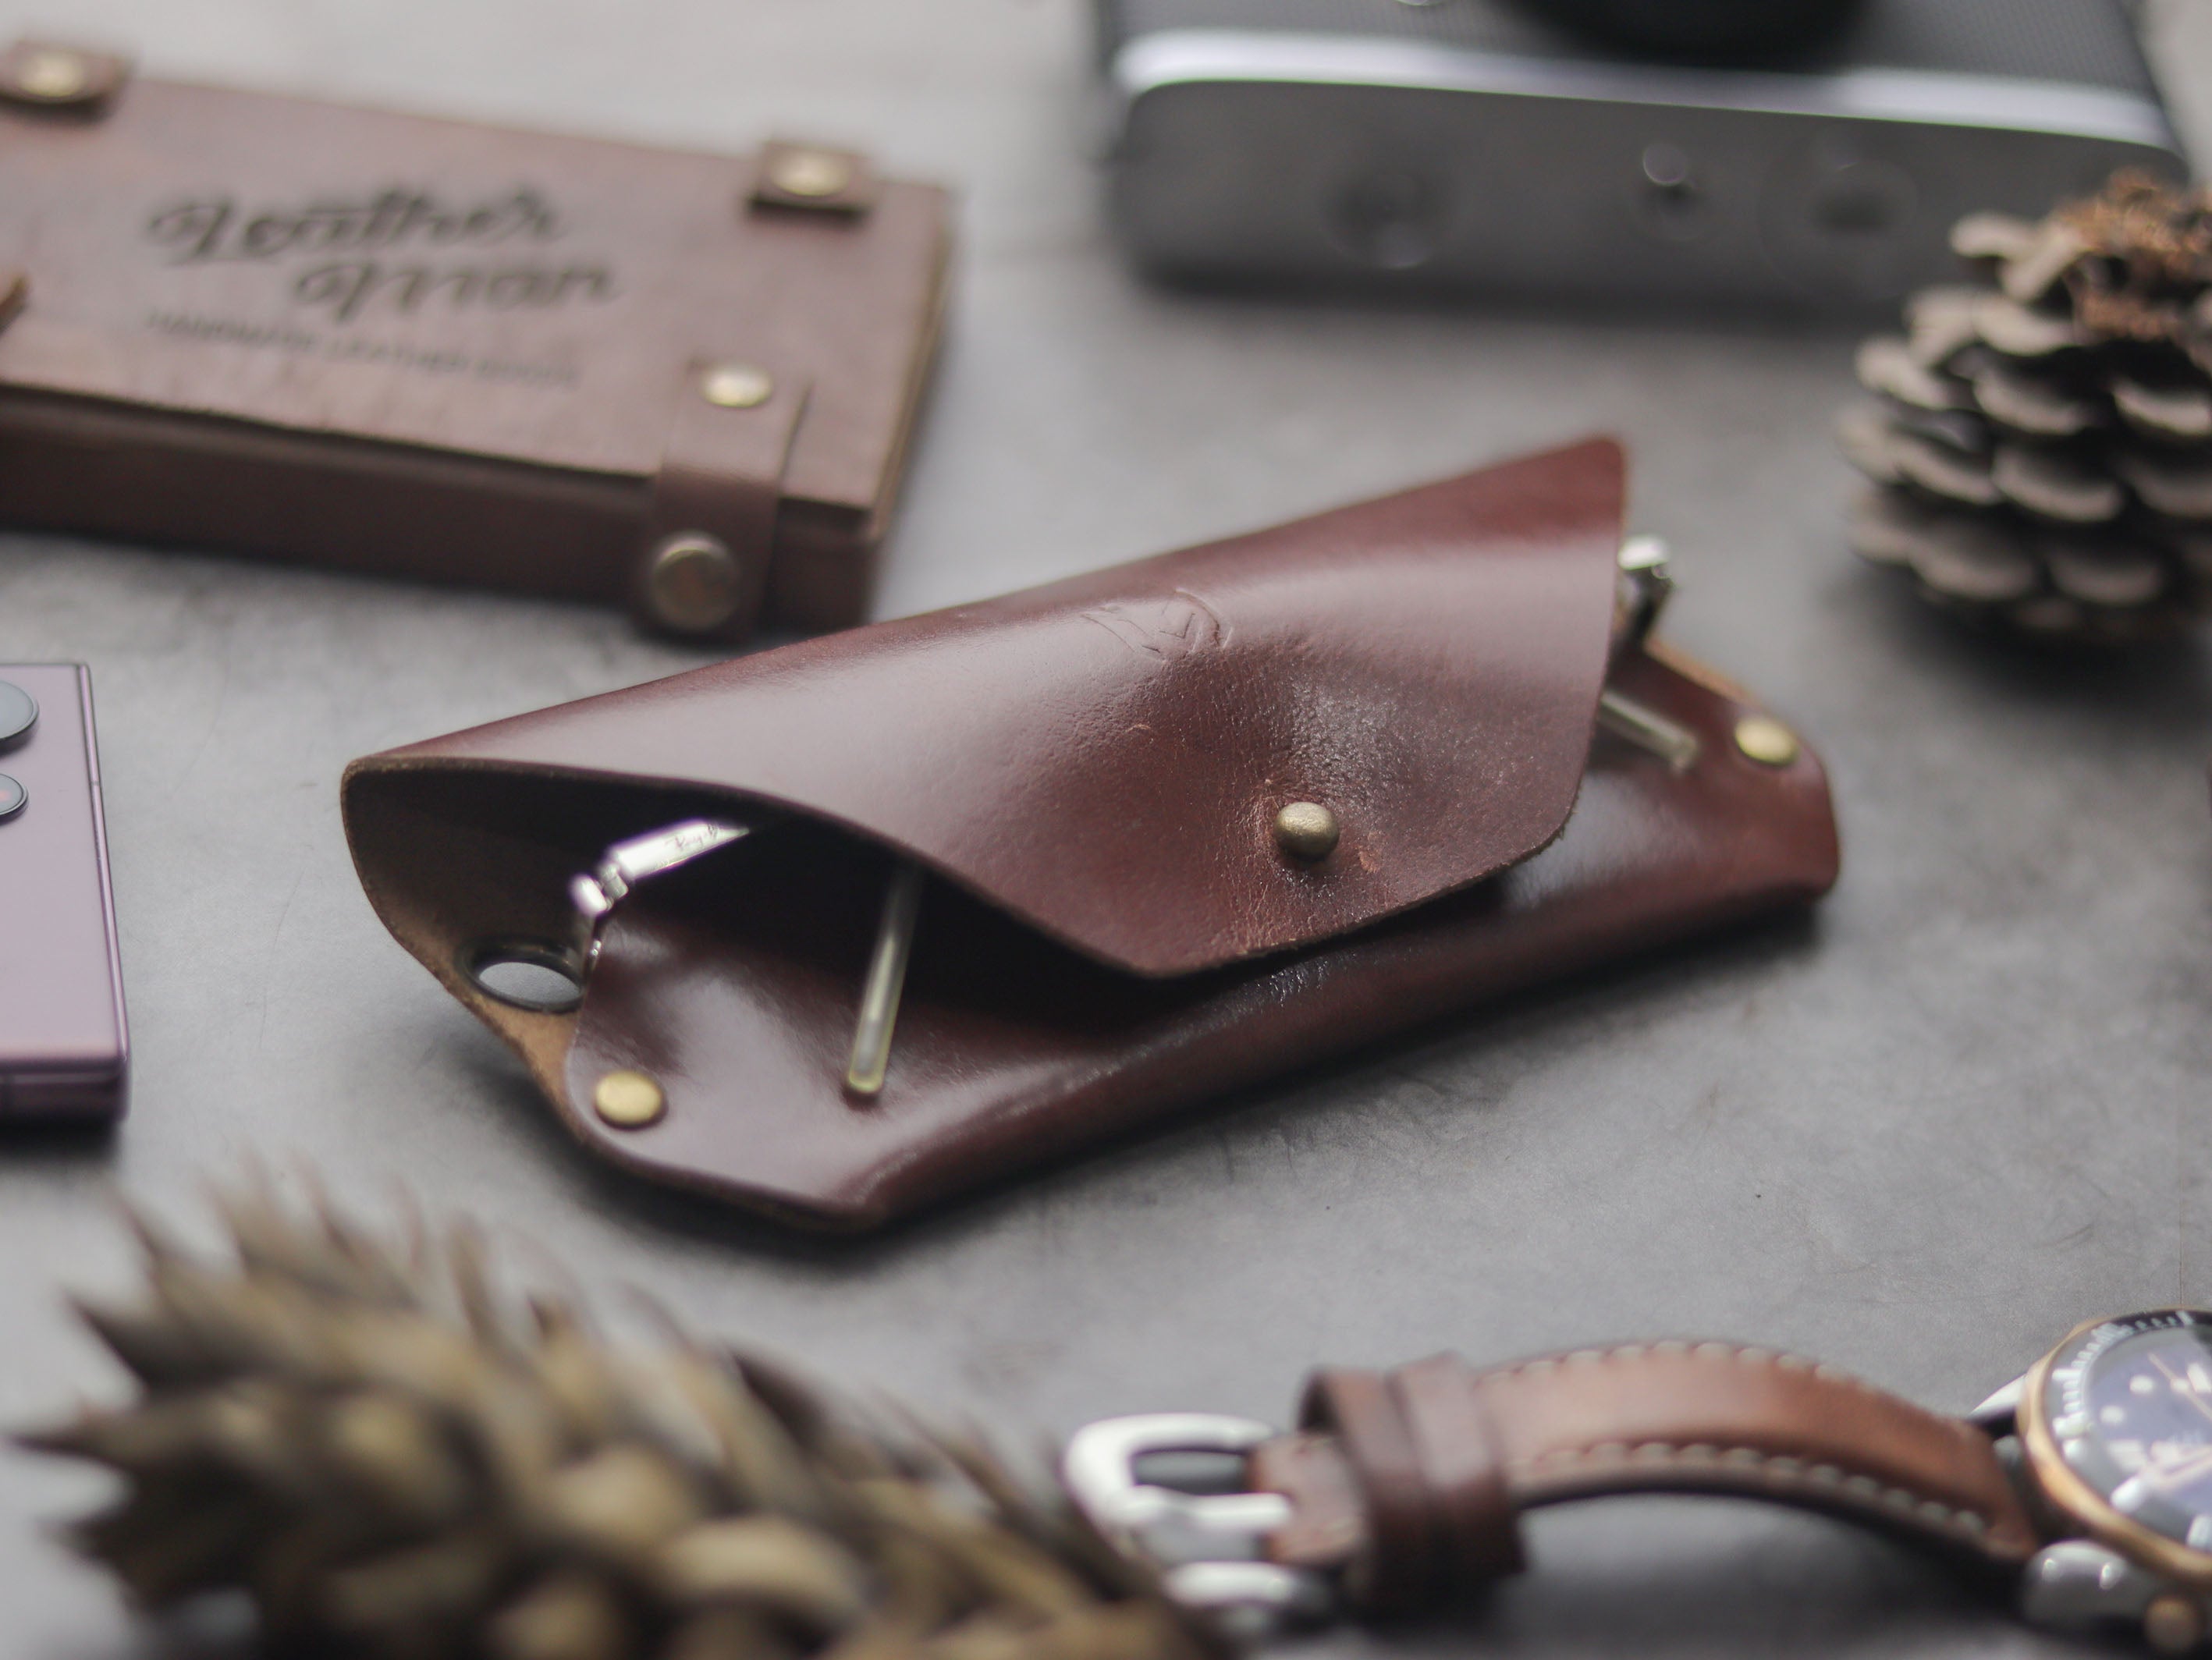 SG-1 SUNGLASSES CASE - WHISKY BROWN LEATHER